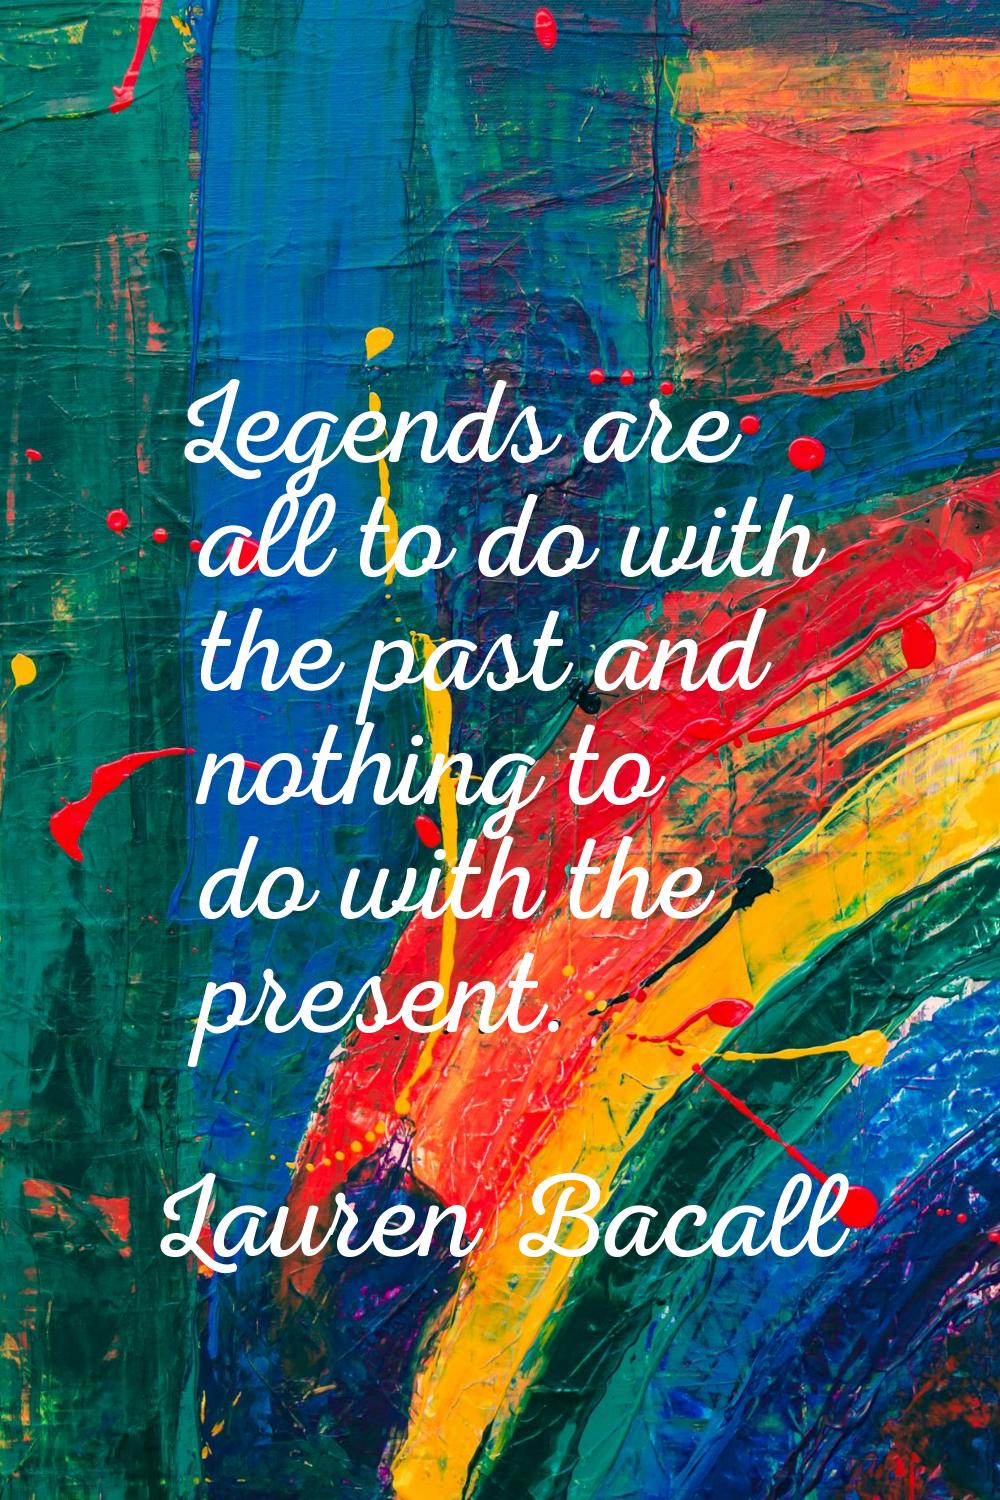 Legends are all to do with the past and nothing to do with the present.